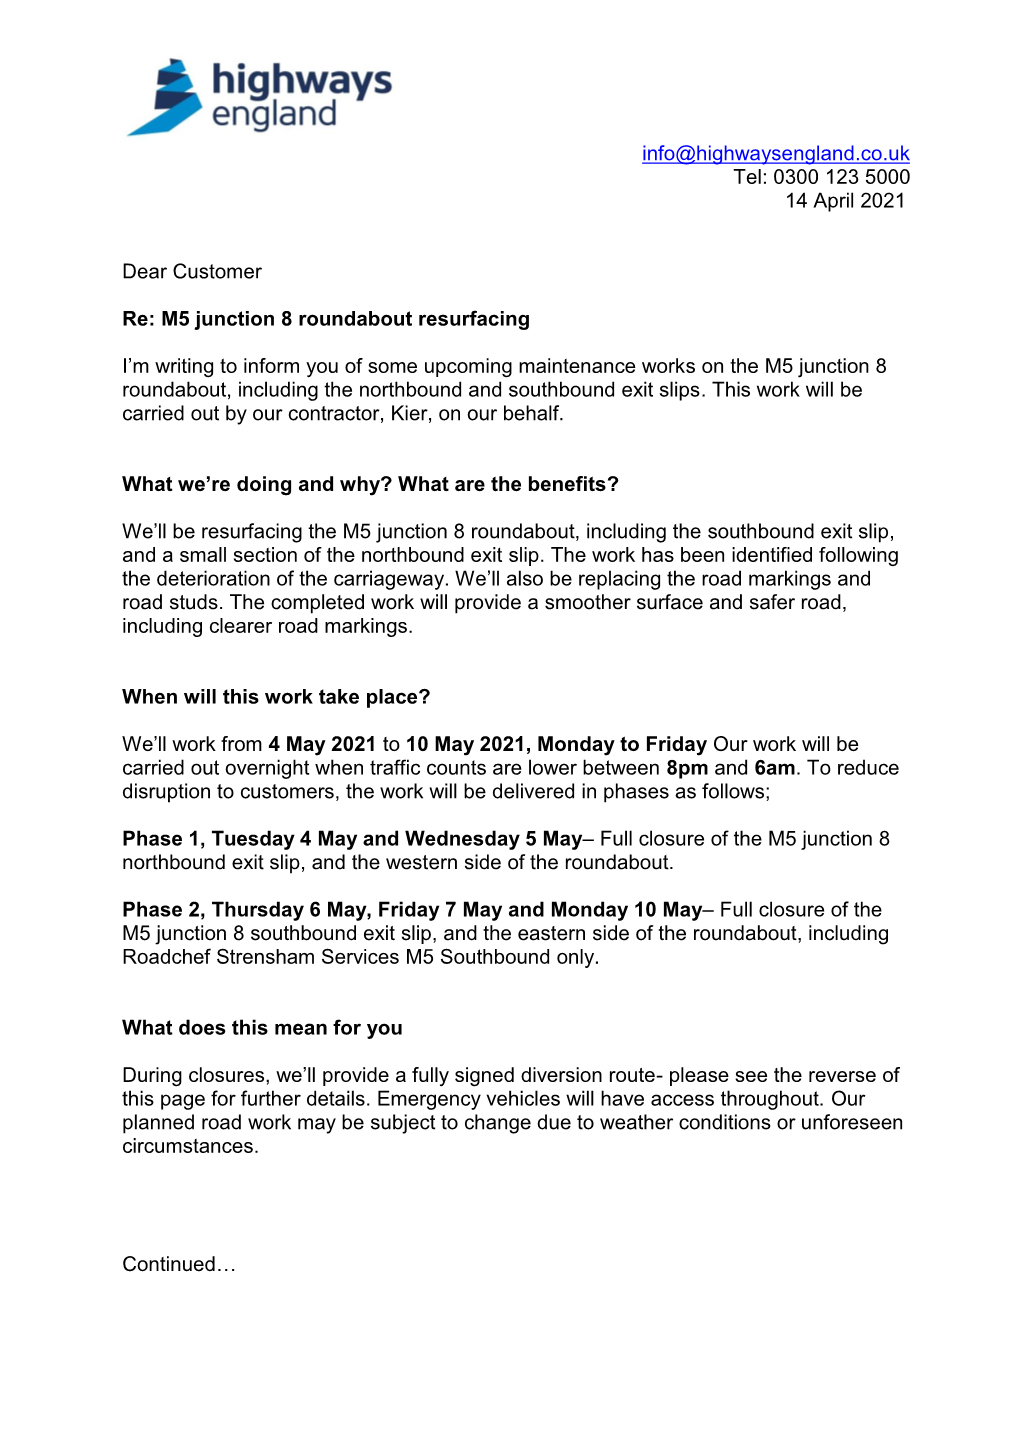 M5 Junction 8 Roundabout Resurfacing Letter To